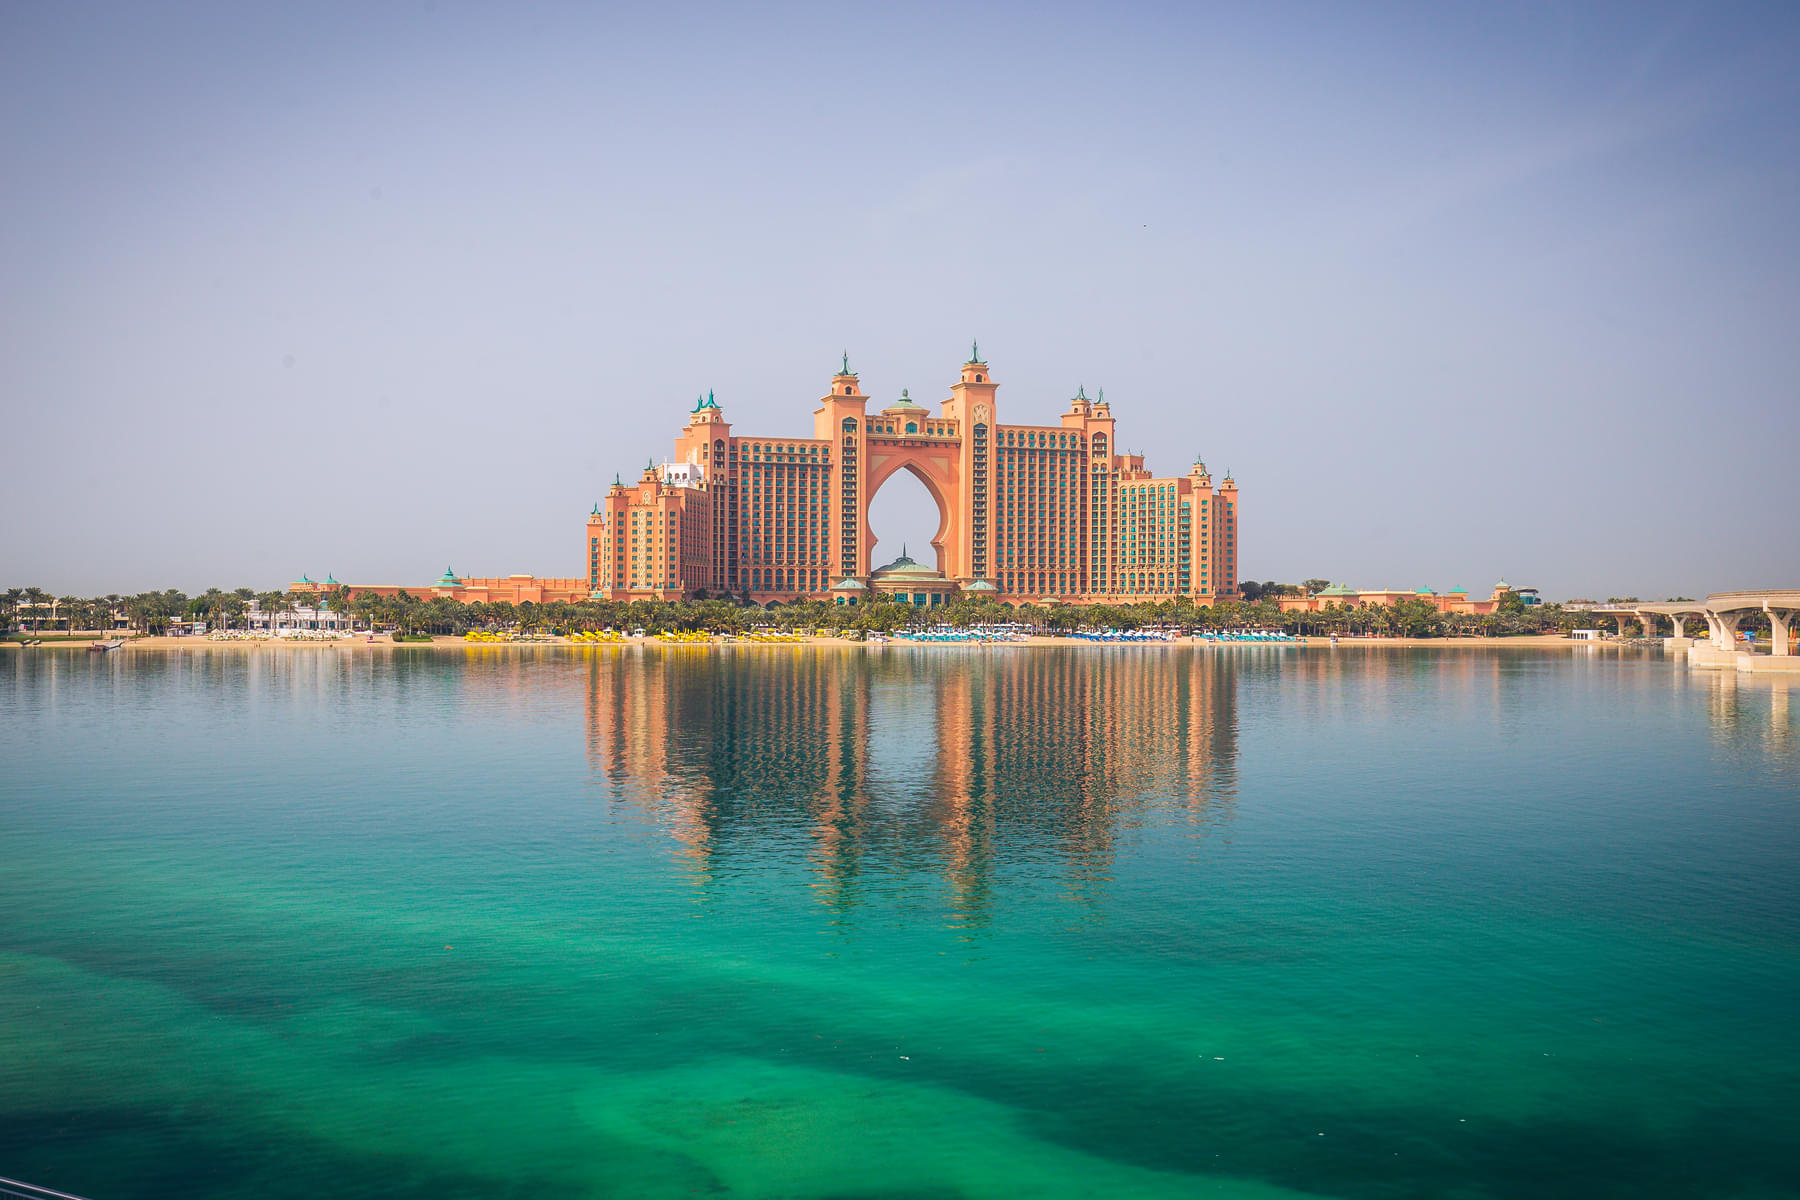 Get a view of Atlantis The Palm from the waterpark